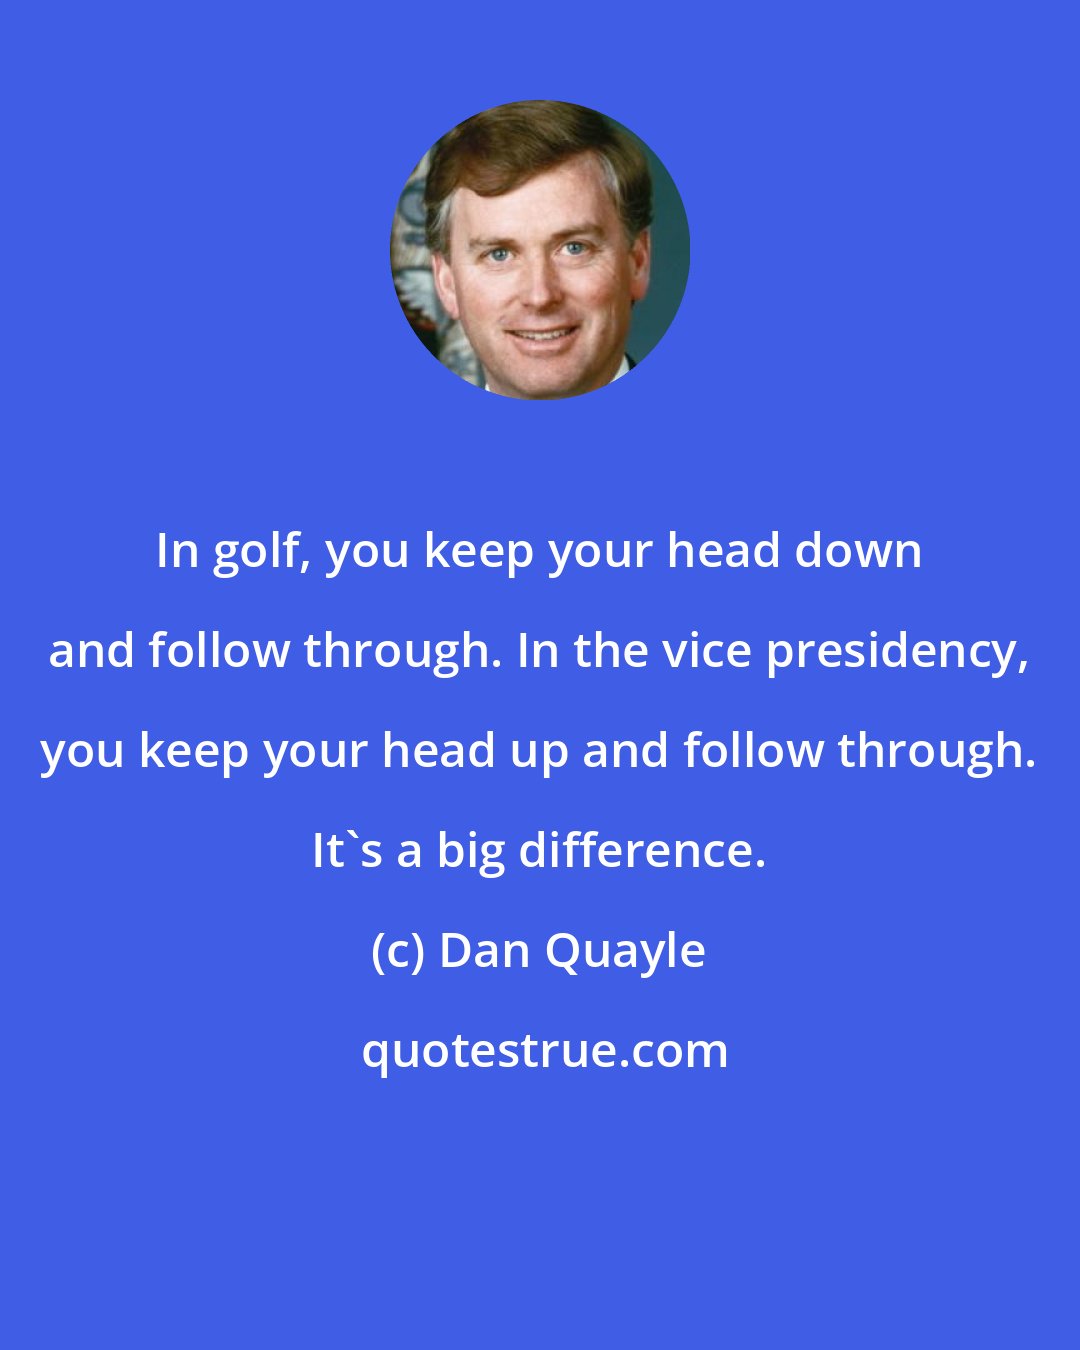 Dan Quayle: In golf, you keep your head down and follow through. In the vice presidency, you keep your head up and follow through. It's a big difference.